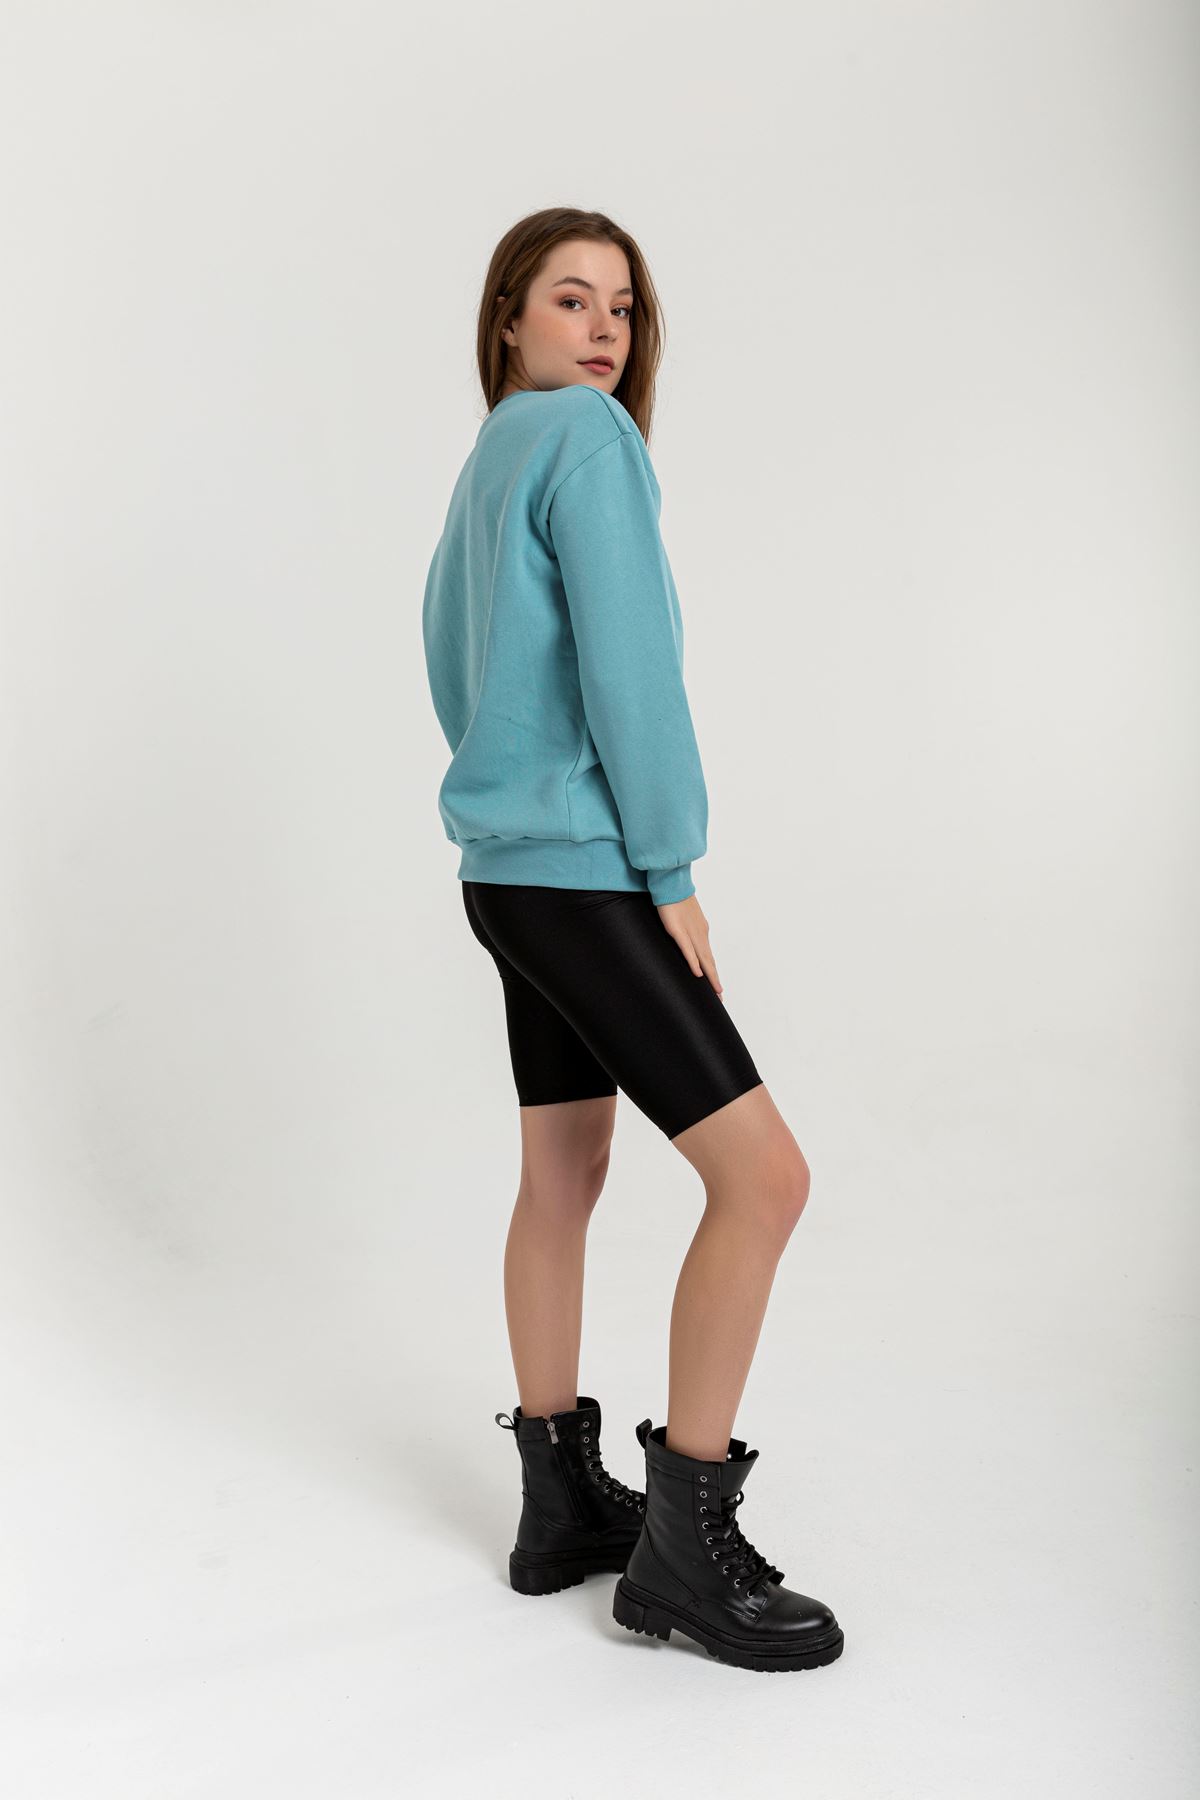 Third Knit With Wool İnside Fabric Long Sleeve Hip Height Inscribed Women Sweatshirt - Blue